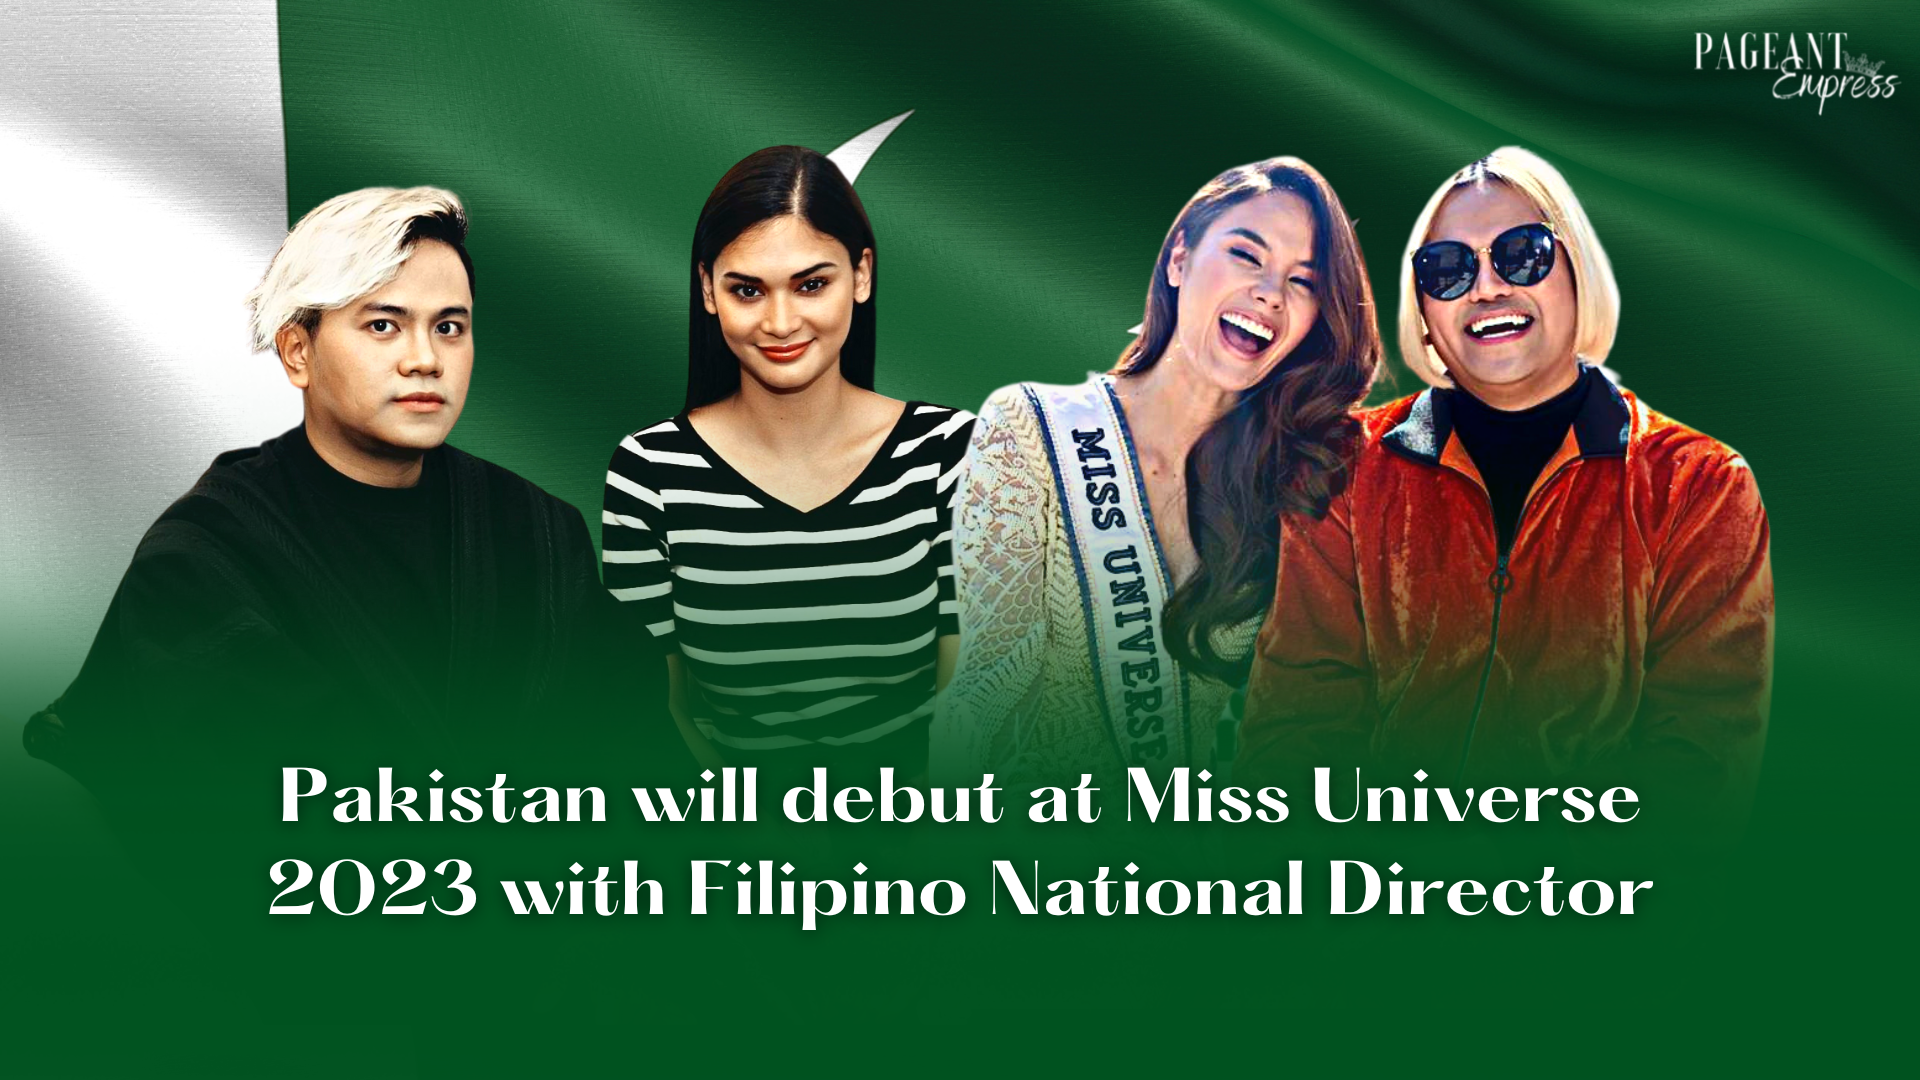 Pakistan will debut at Miss Universe 2023 with Filipino National Director